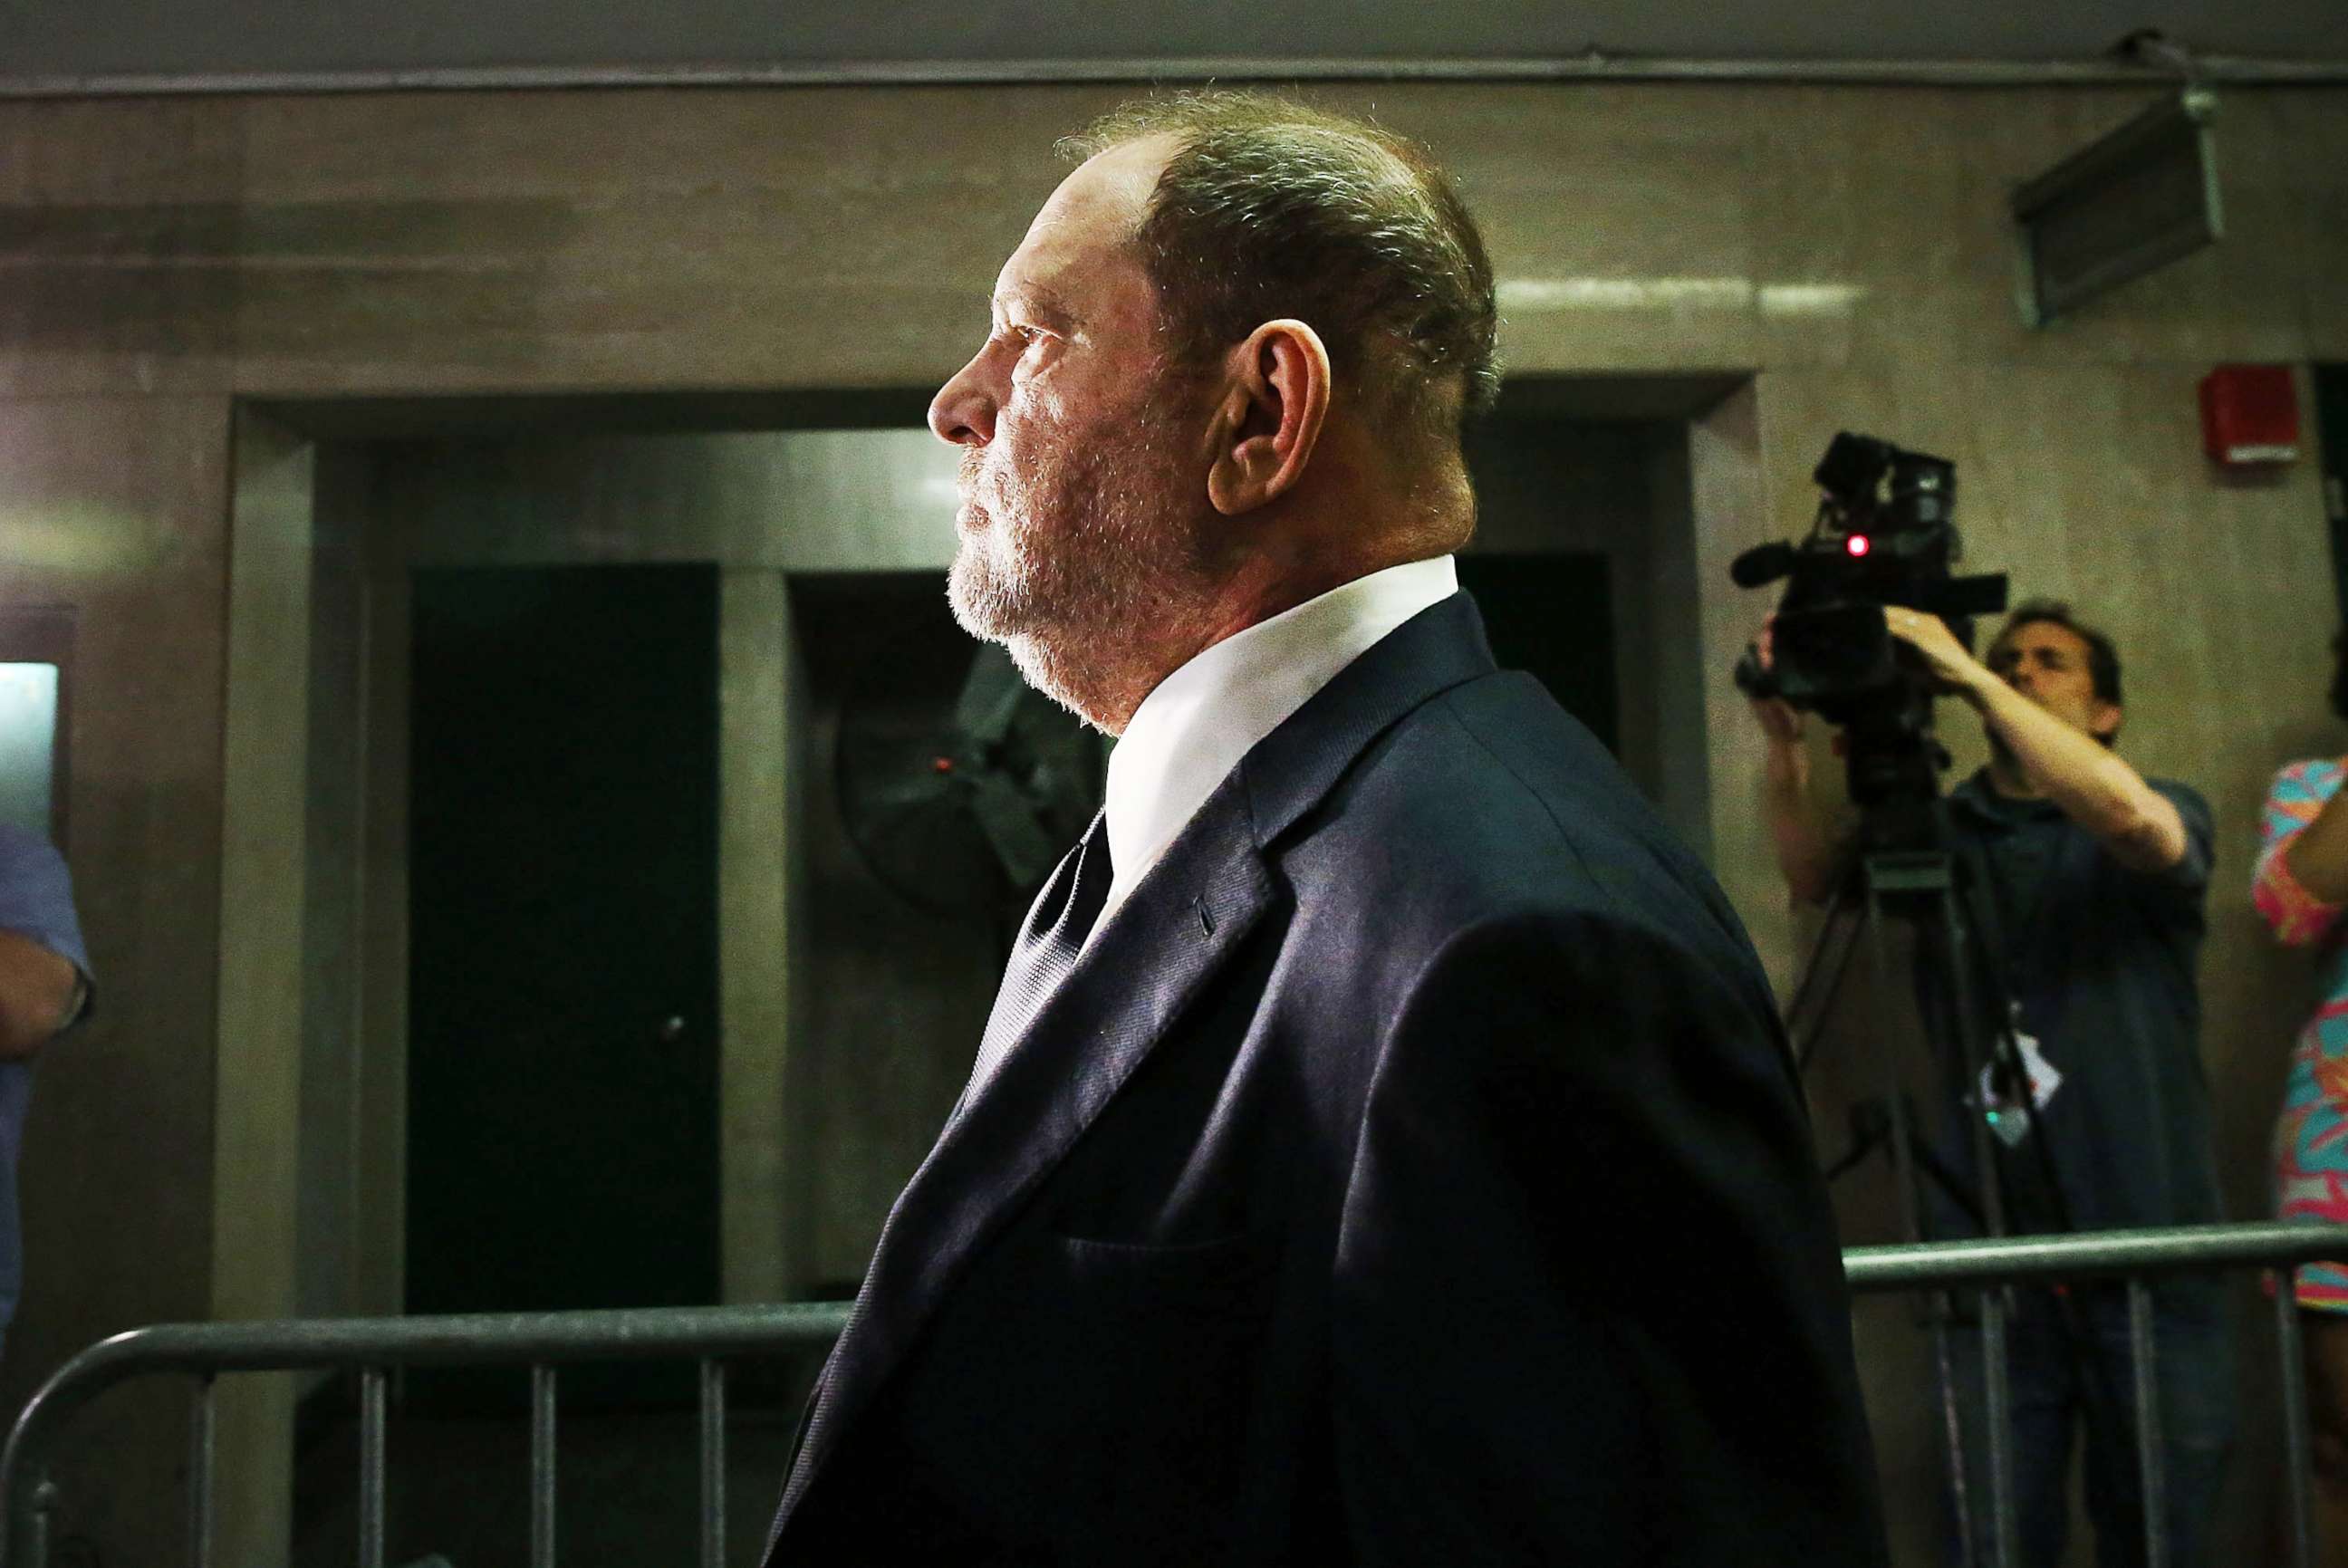 Harvey Weinstein pleads not guilty to rape charges